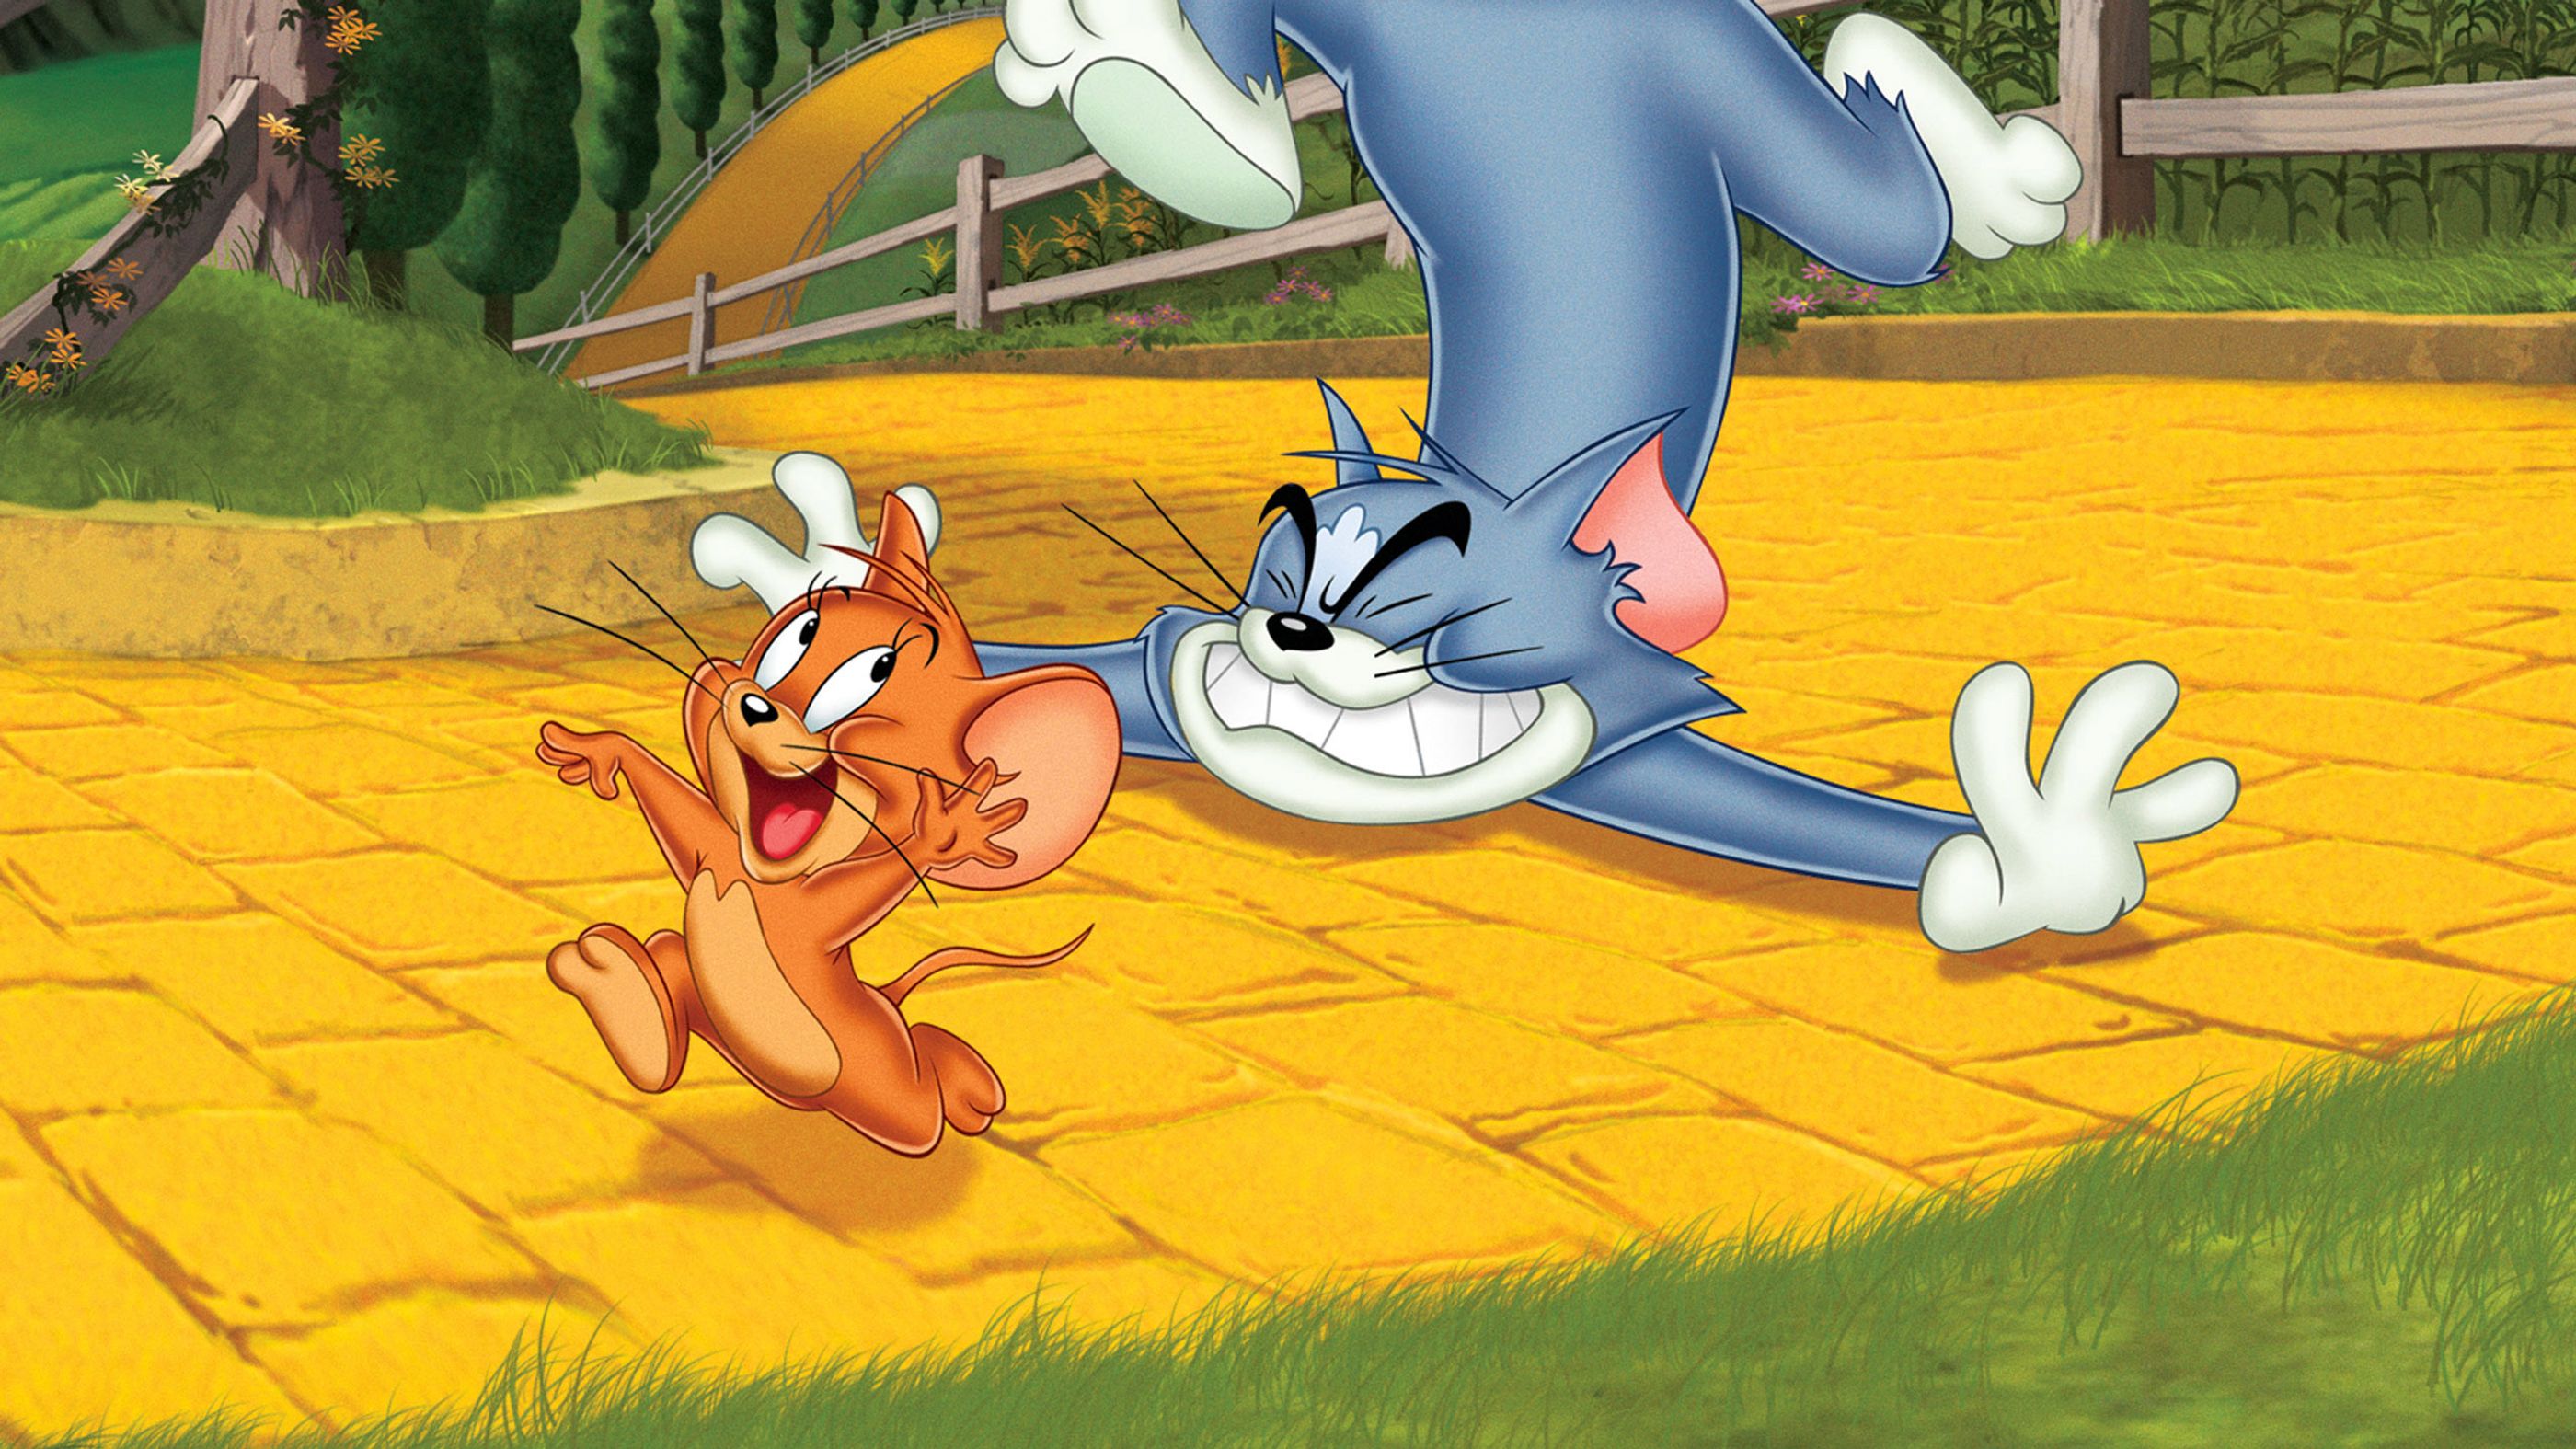 tom and jerry and the wizard of oz full movie